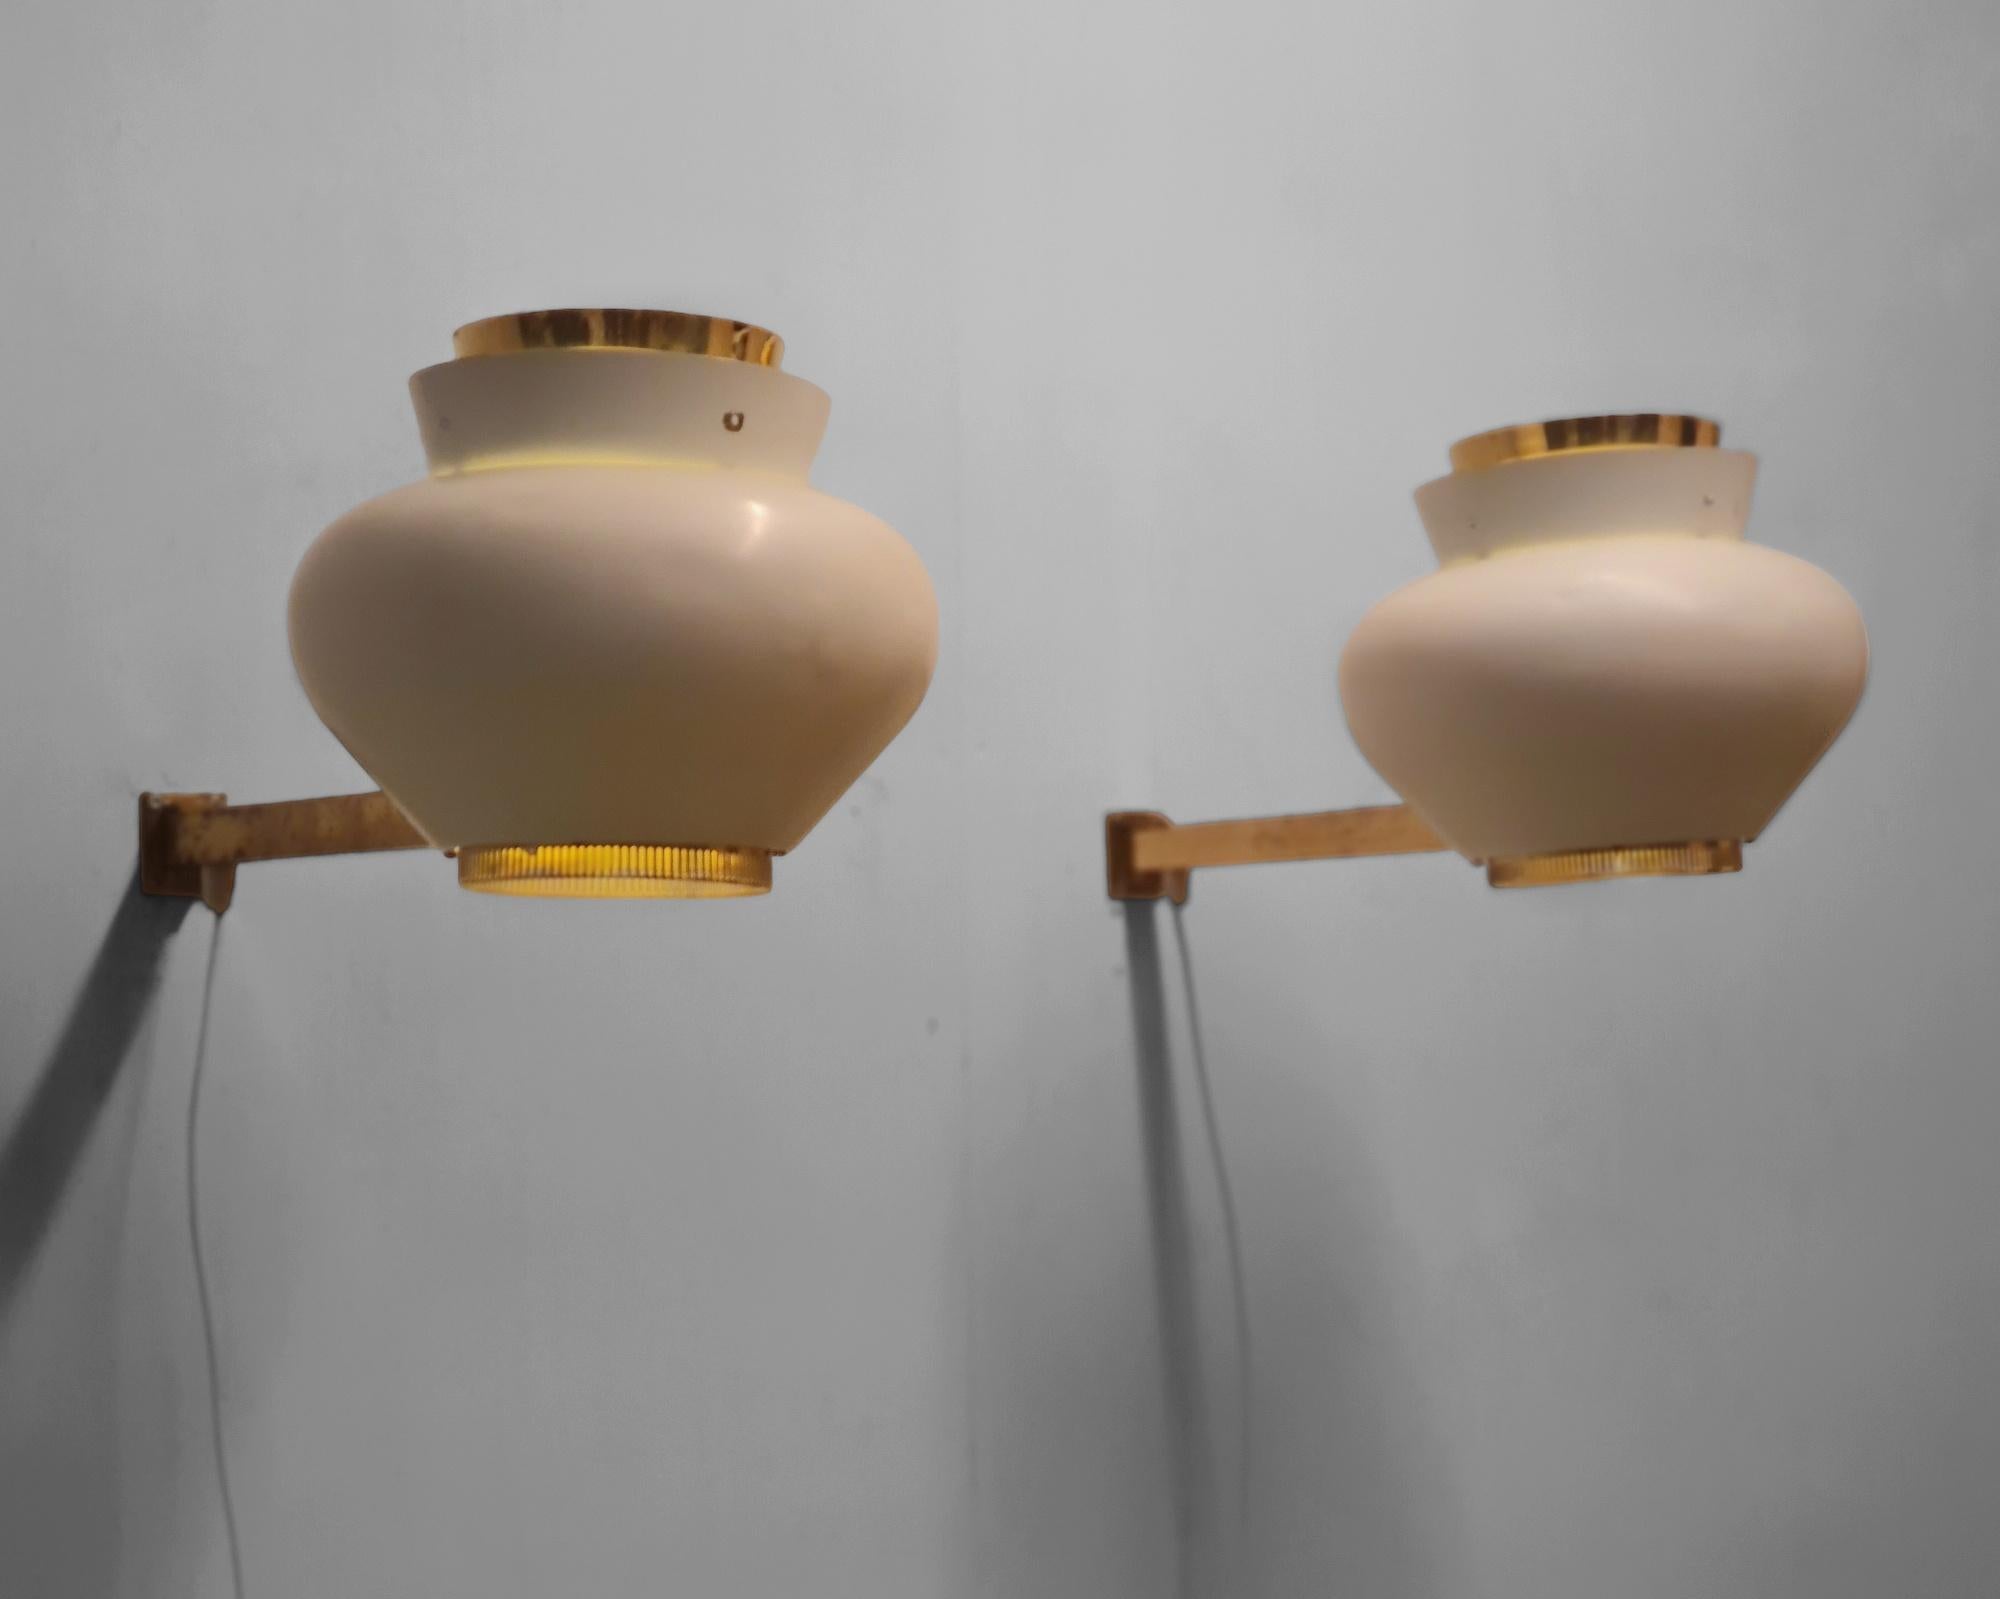 A Pair of Alvar Aalto Commissioned Wall Lamps, Valaistustyö 1950s For Sale 12